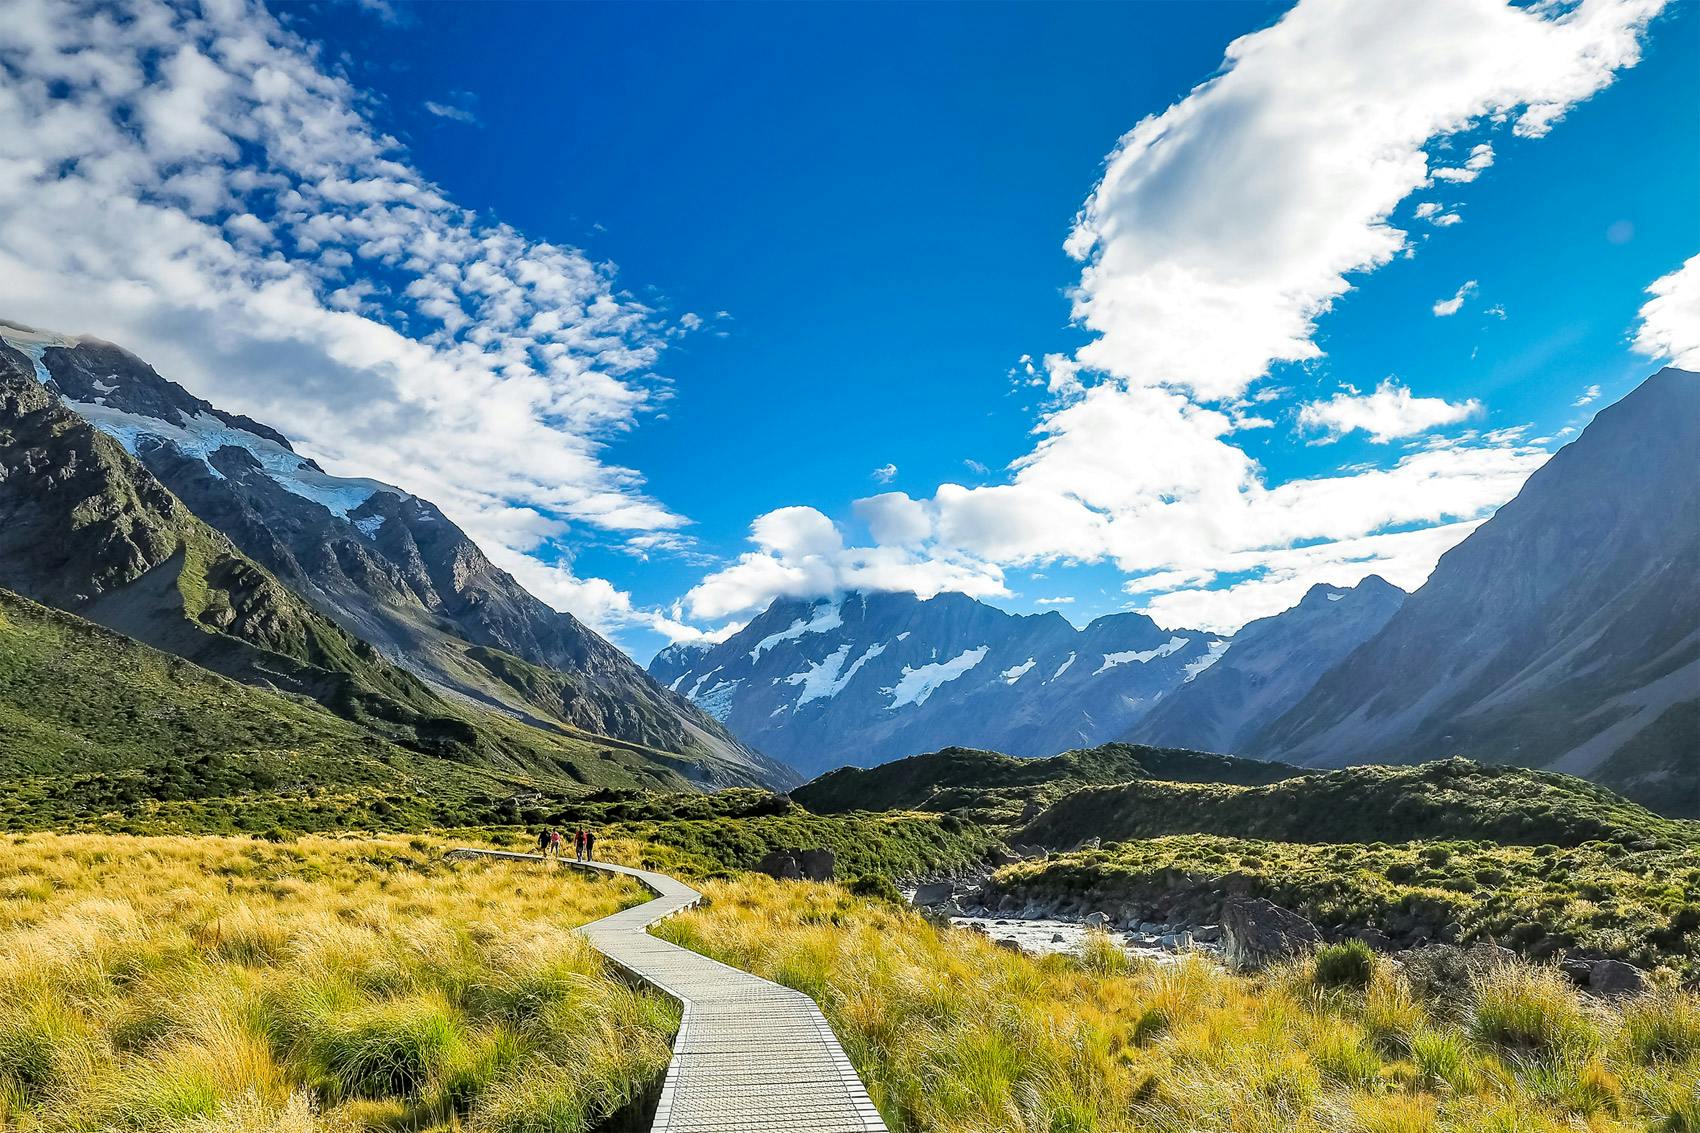 Path through New Zealand countryside with mountains sprawling ahead and a blue sky with clouds